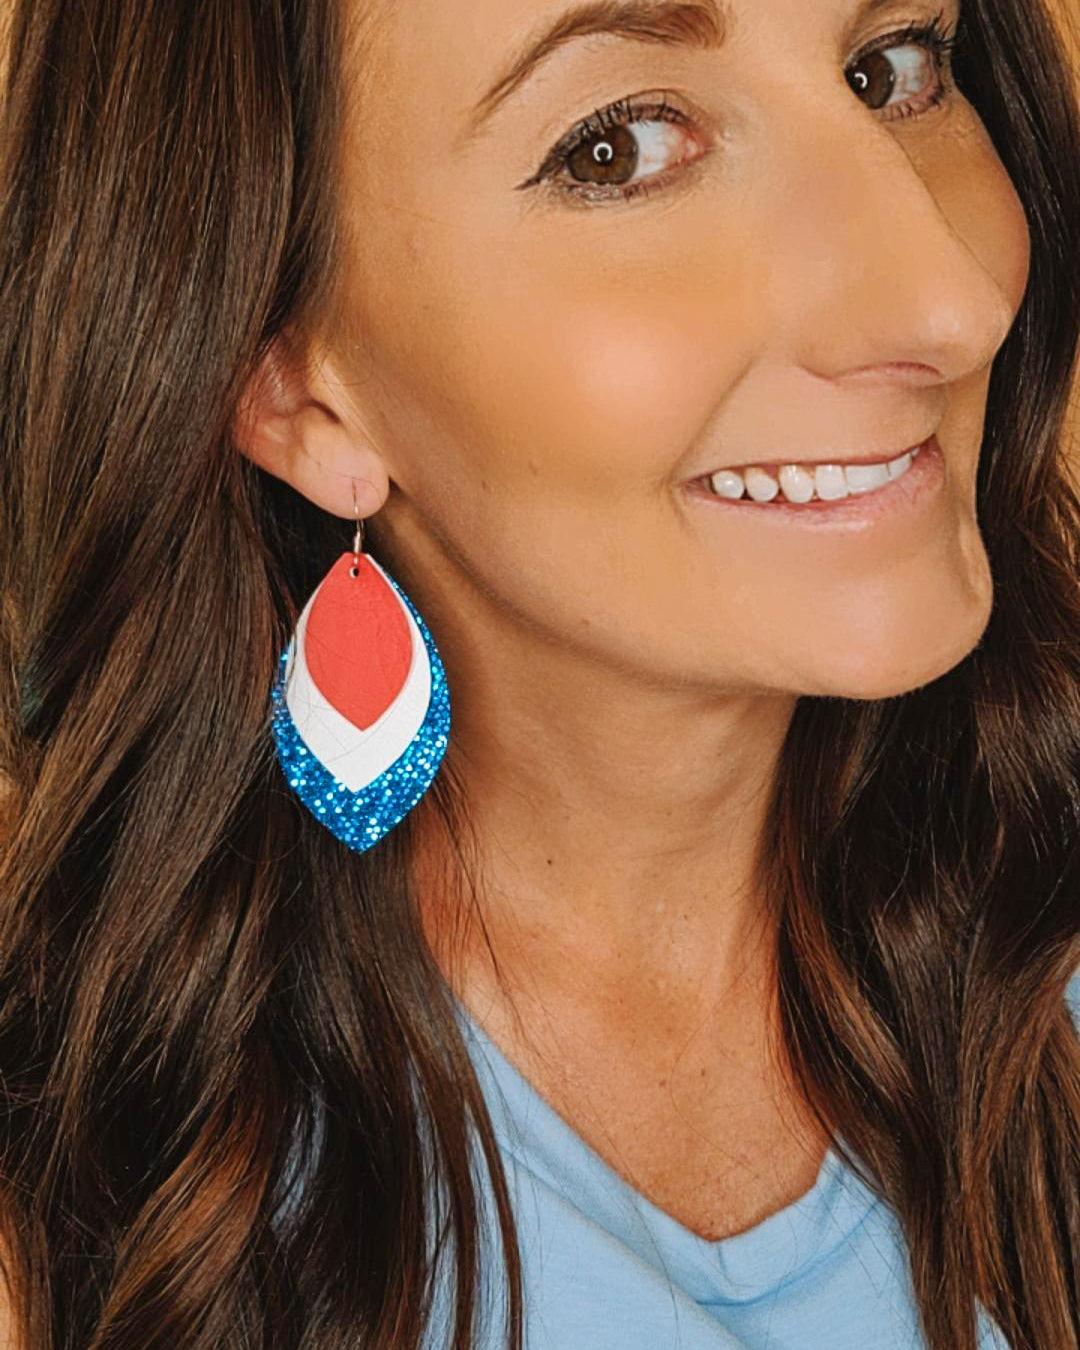 Red, White and Blue Glitter Oval Leaf Earrings